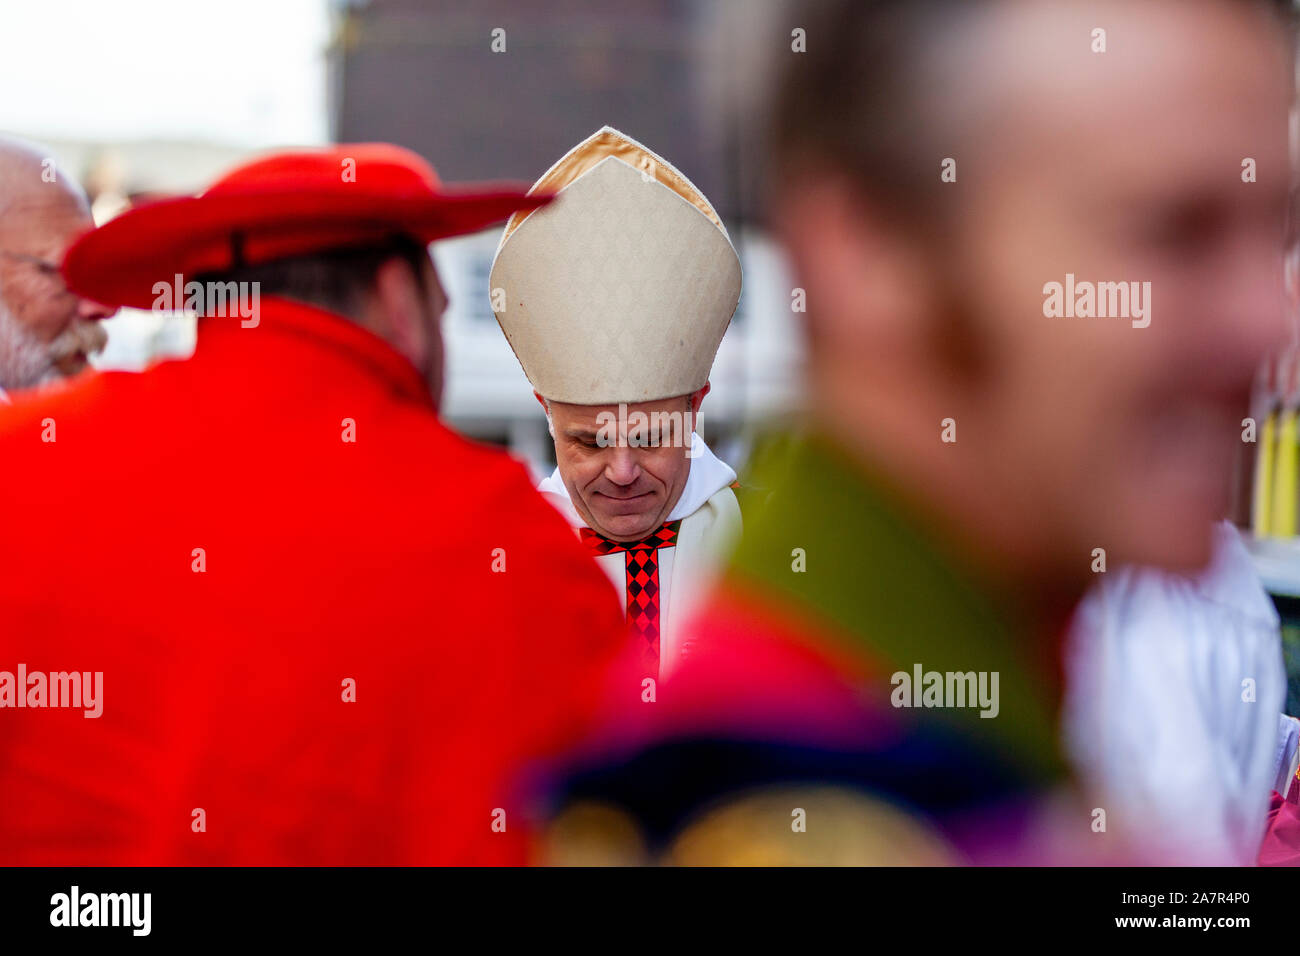 Lewes, UK. 4th November 2019. Prior to the biggest bonfire night (Guy Fawkes) celebrations in the country, representatives from each of Lewes’s six bonfire societies meet for the annual ‘Bishops Breakfast’ dressed in costumes of the clergy. Lewes, Sussex, UK. Credit: Grant Rooney/Alamy Live News Stock Photo